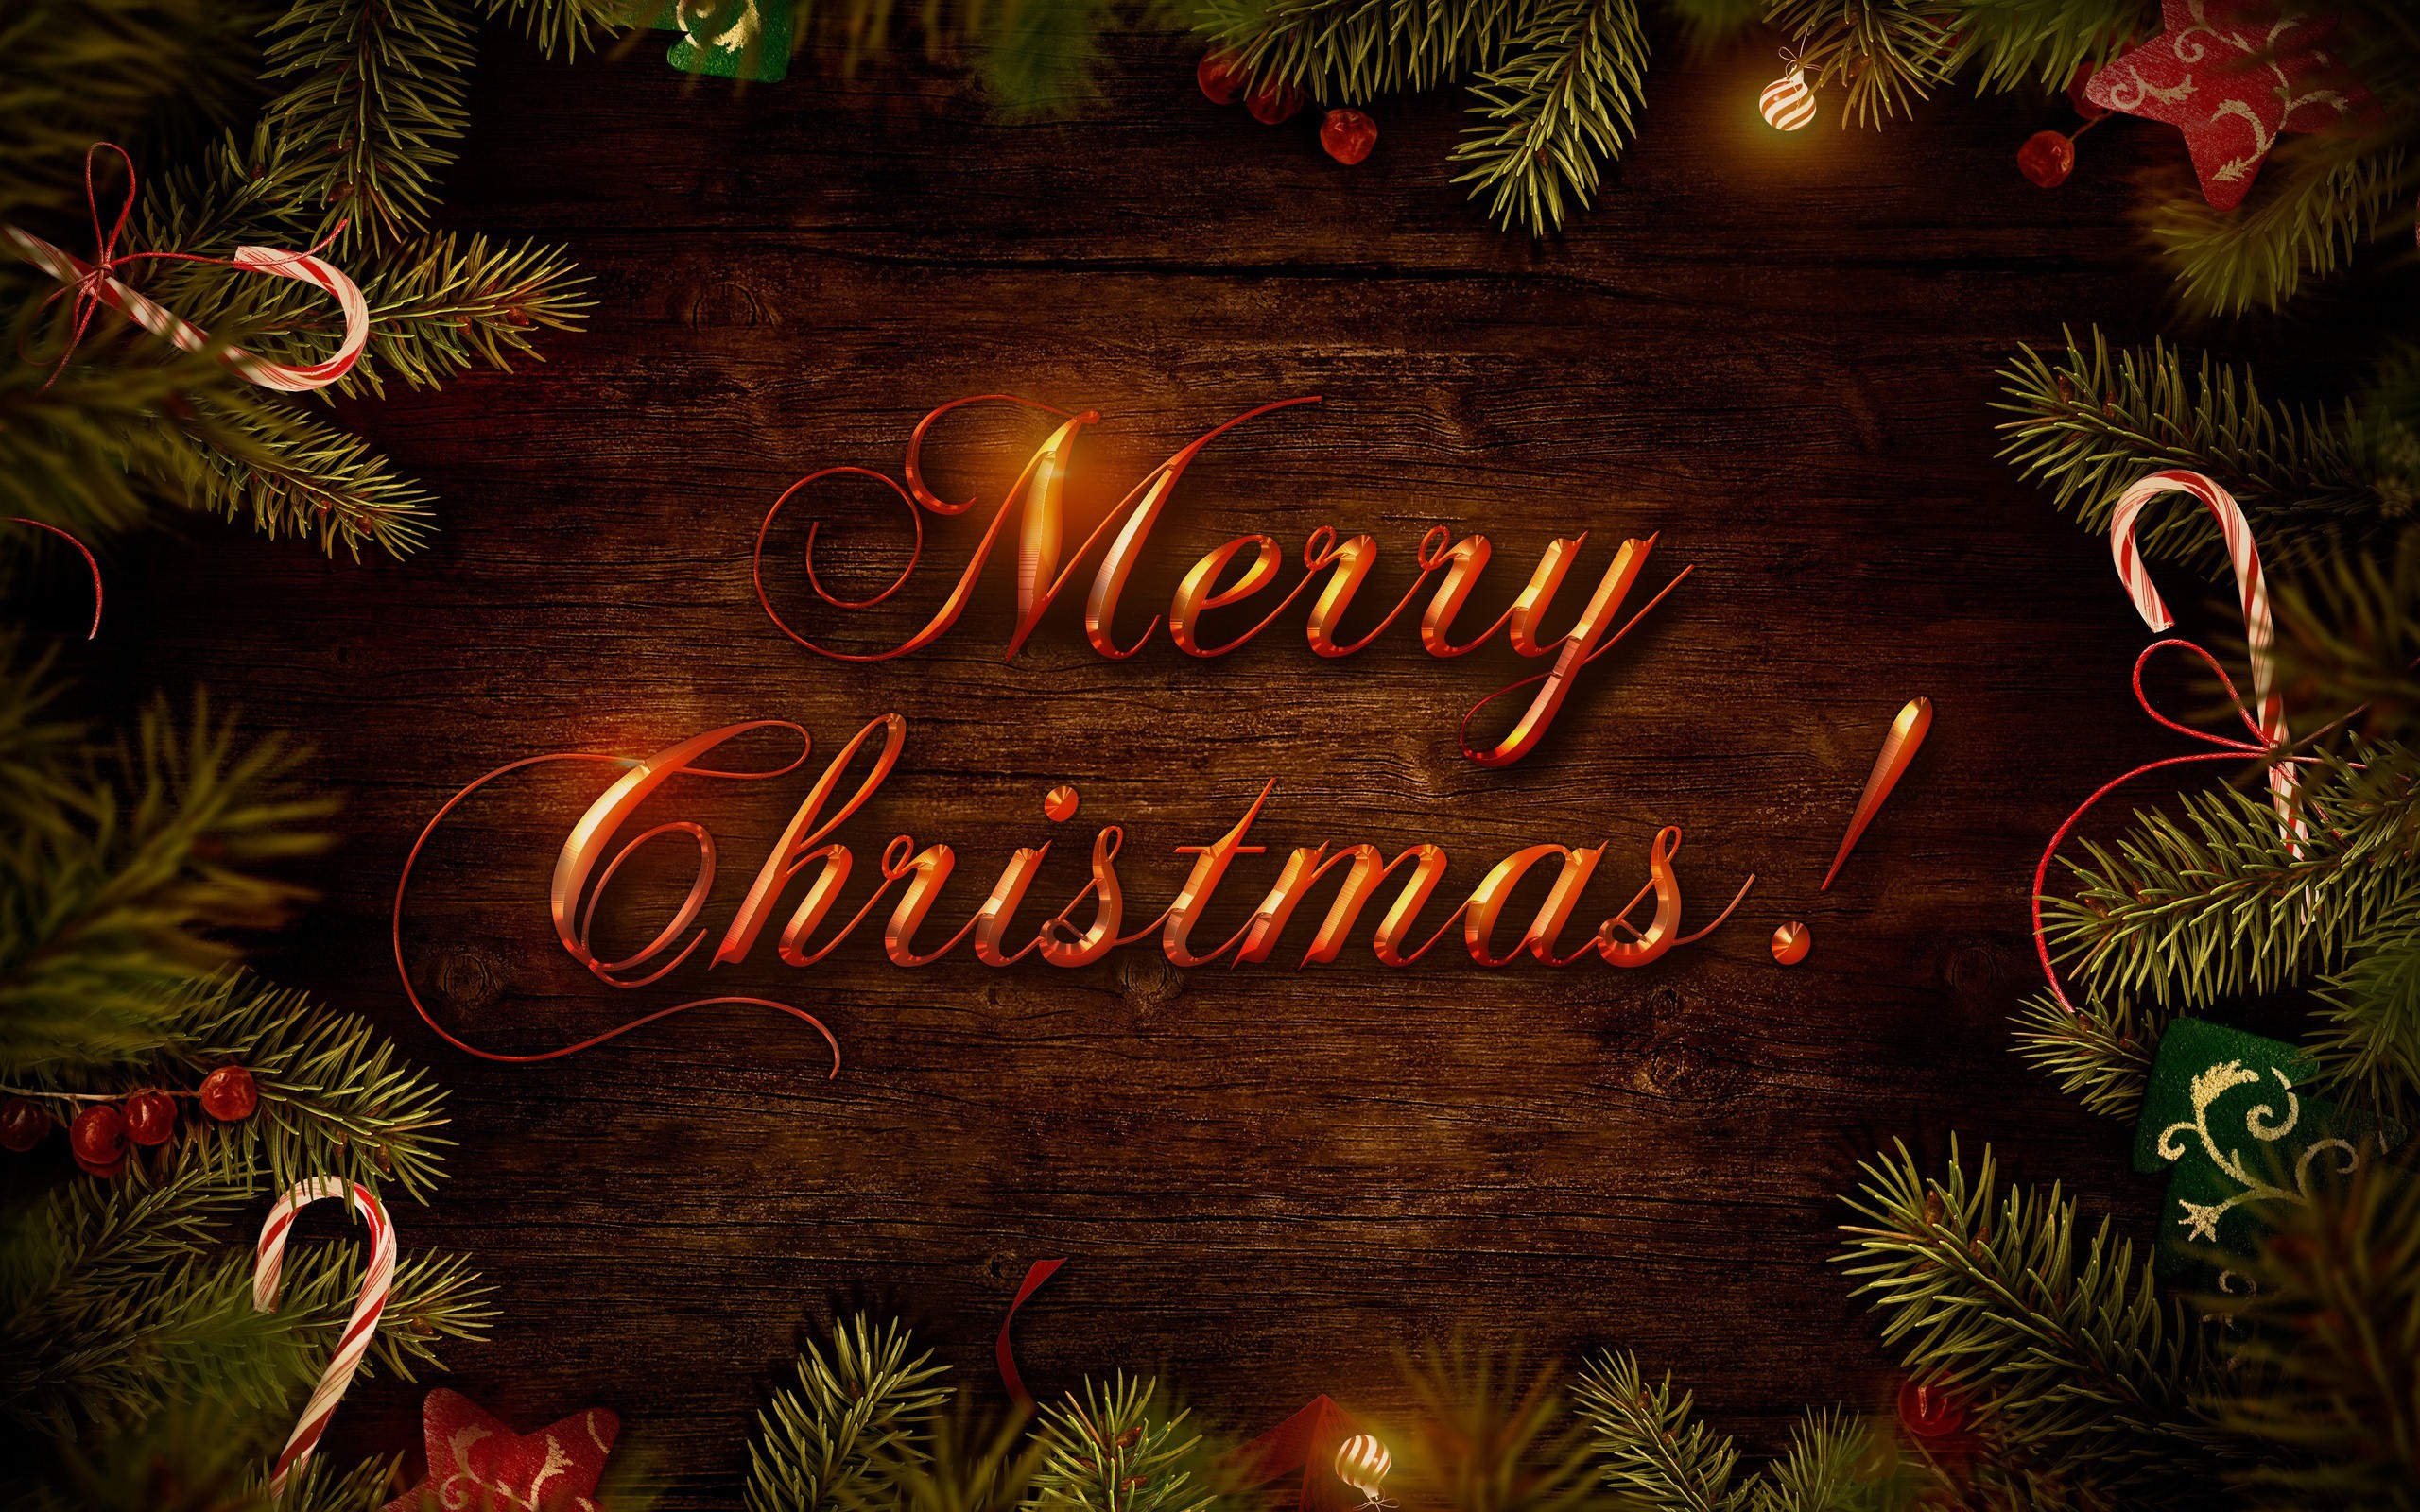 500+ Merry Christmas Pictures [HD]